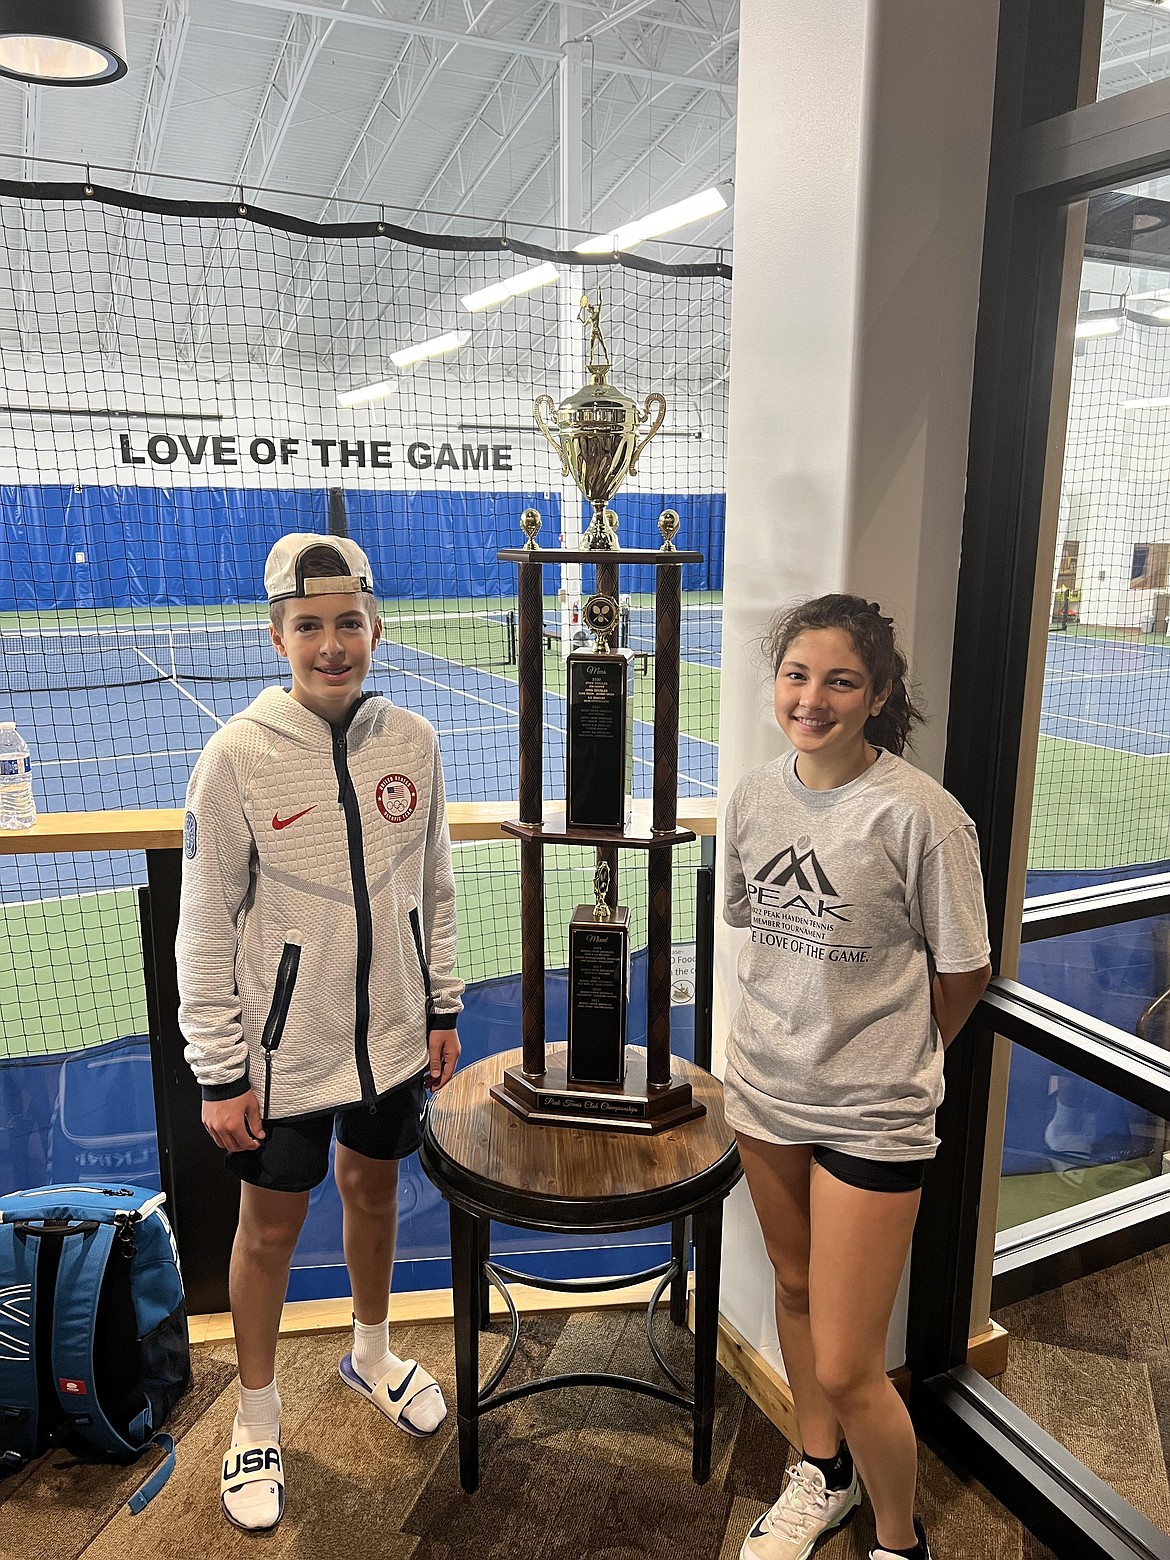 Courtesy photo
The open mixed doubles champions at the recent Peak Hayden member tennis tournament were, from left, Grant Johnson and Caitlin Combes, who defeated Doug Conboy and Sue Servick 6-3, 4-6, 10-6.